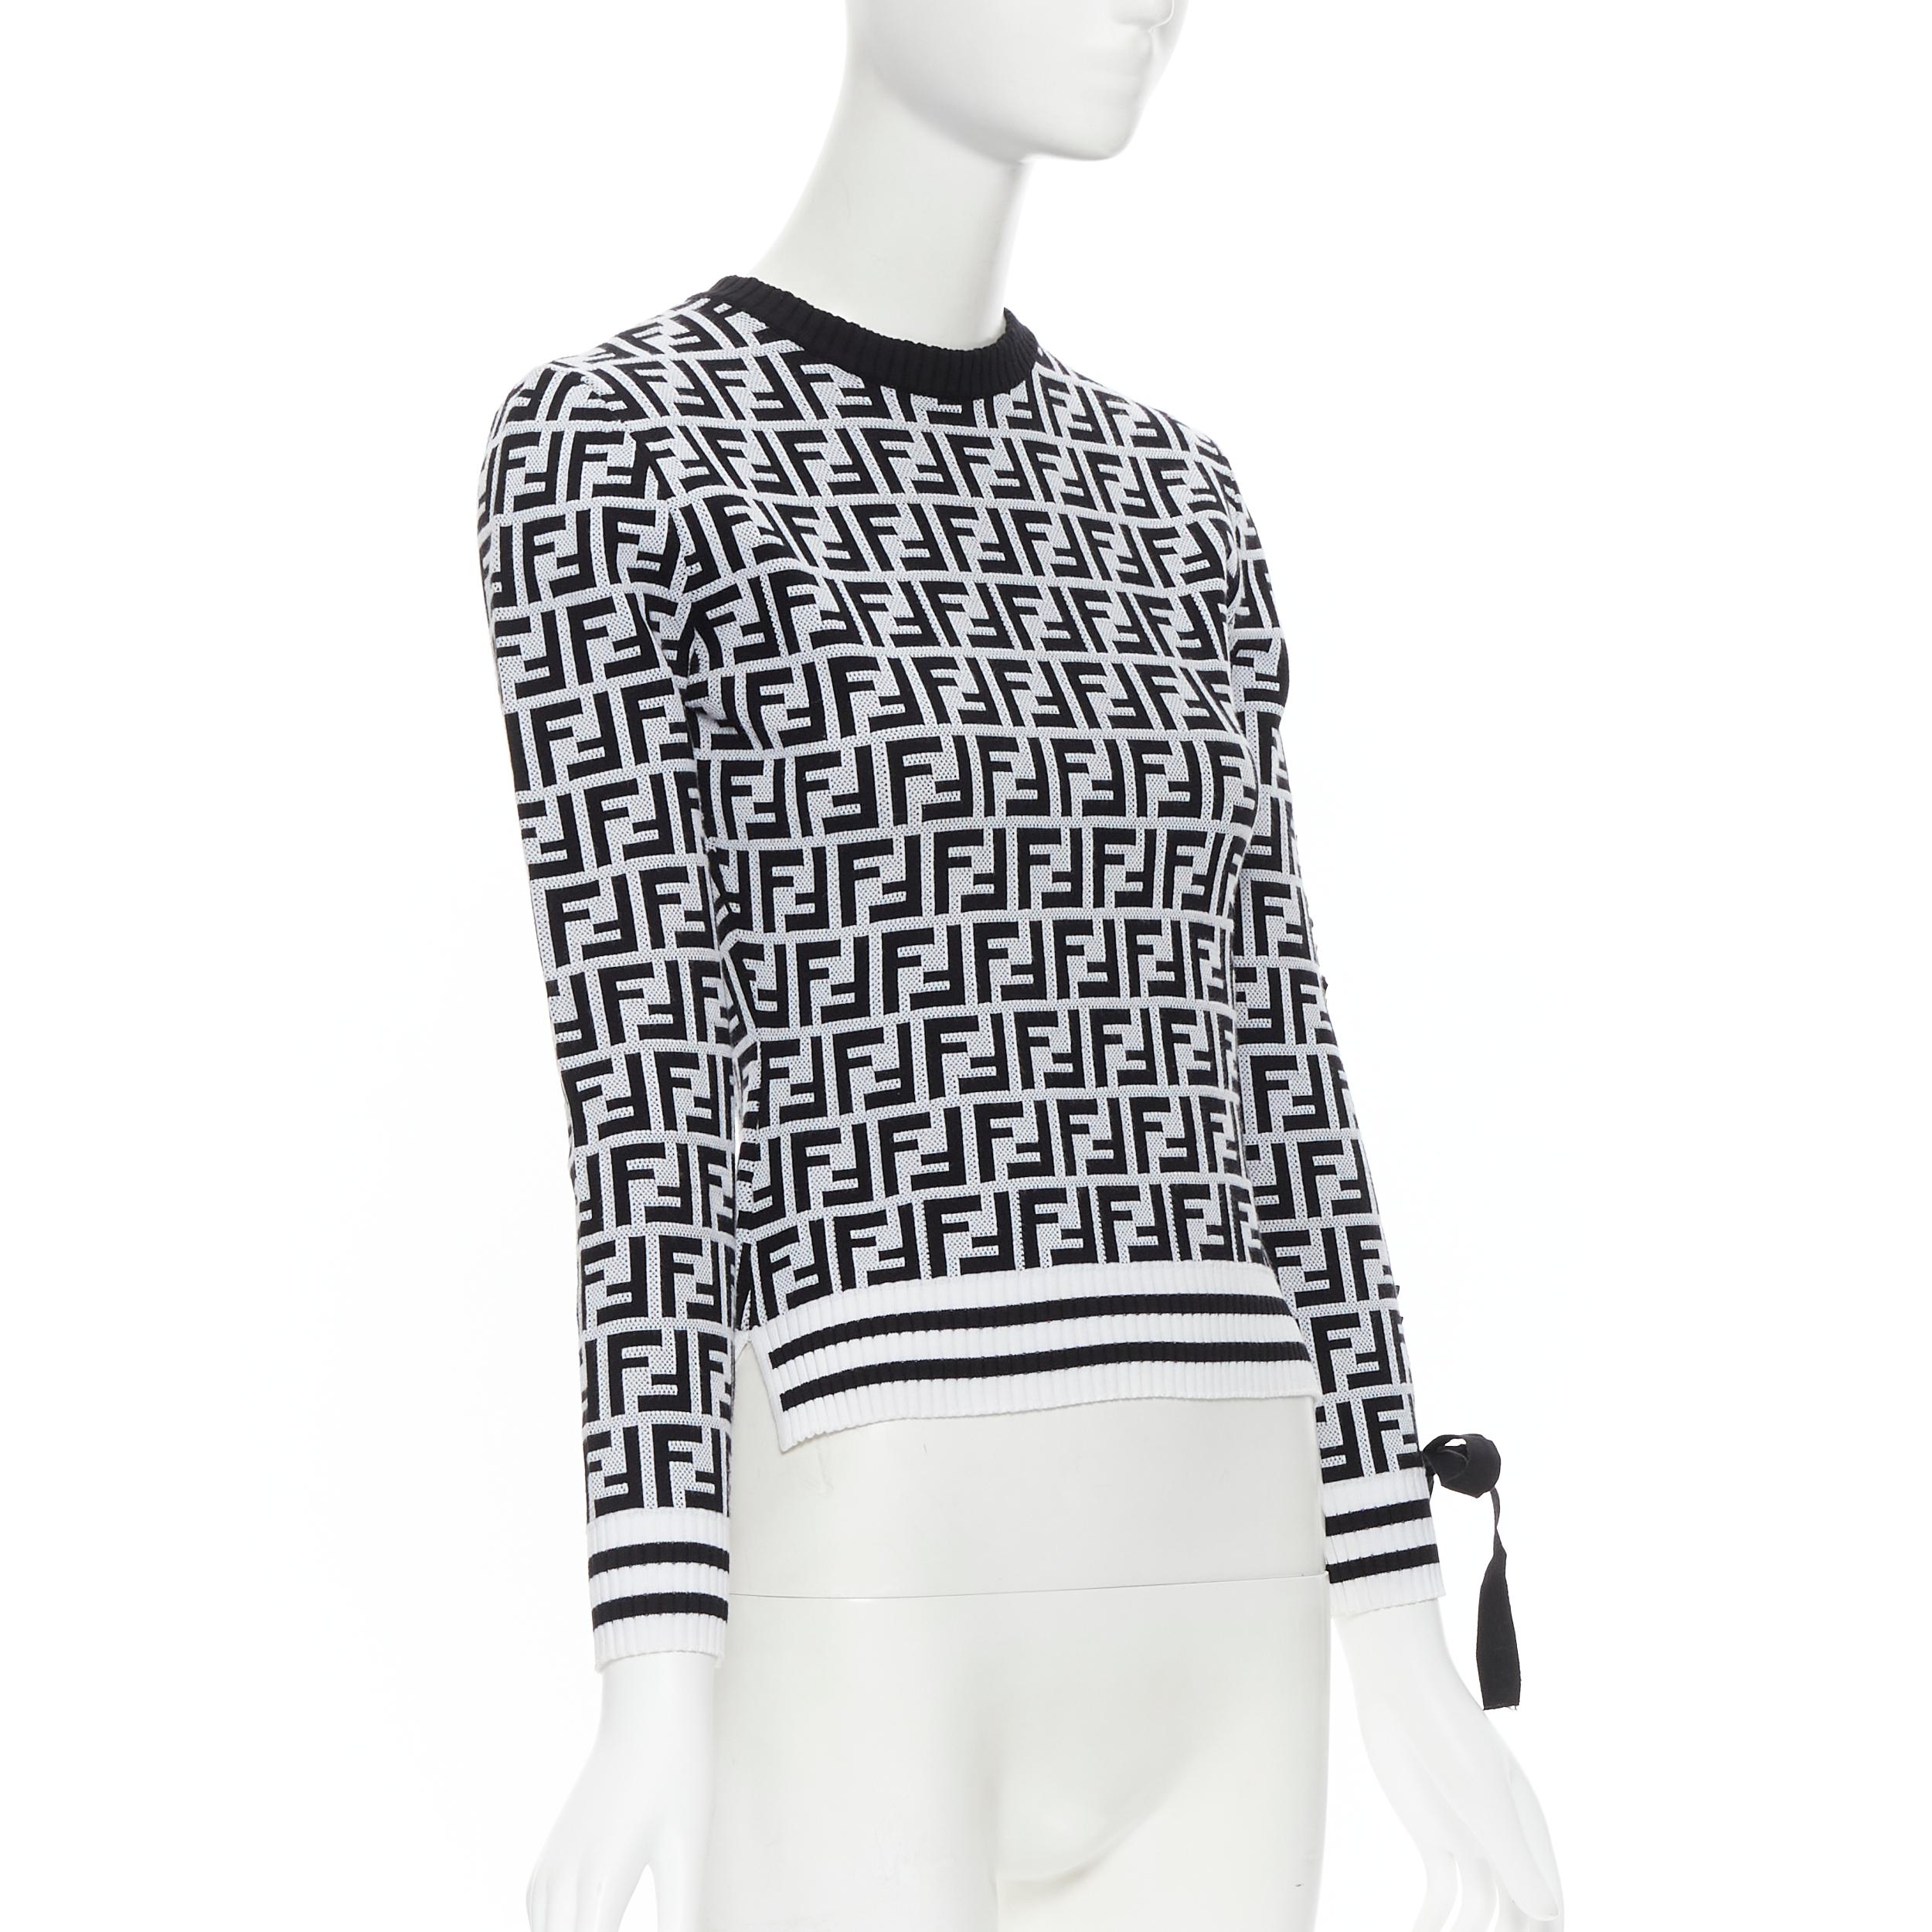 FENDI FF Zucca monogram black white ribbon laced sleeve sweater IT36 XXS Reference: TGAS/B01053 
Brand: Fendi 
Material: Viscose 
Color: Black 
Pattern: Abstract 
Extra Detail: Ribbon lace detail along left sleeve. 
Made in: Italy 

CONDITION: